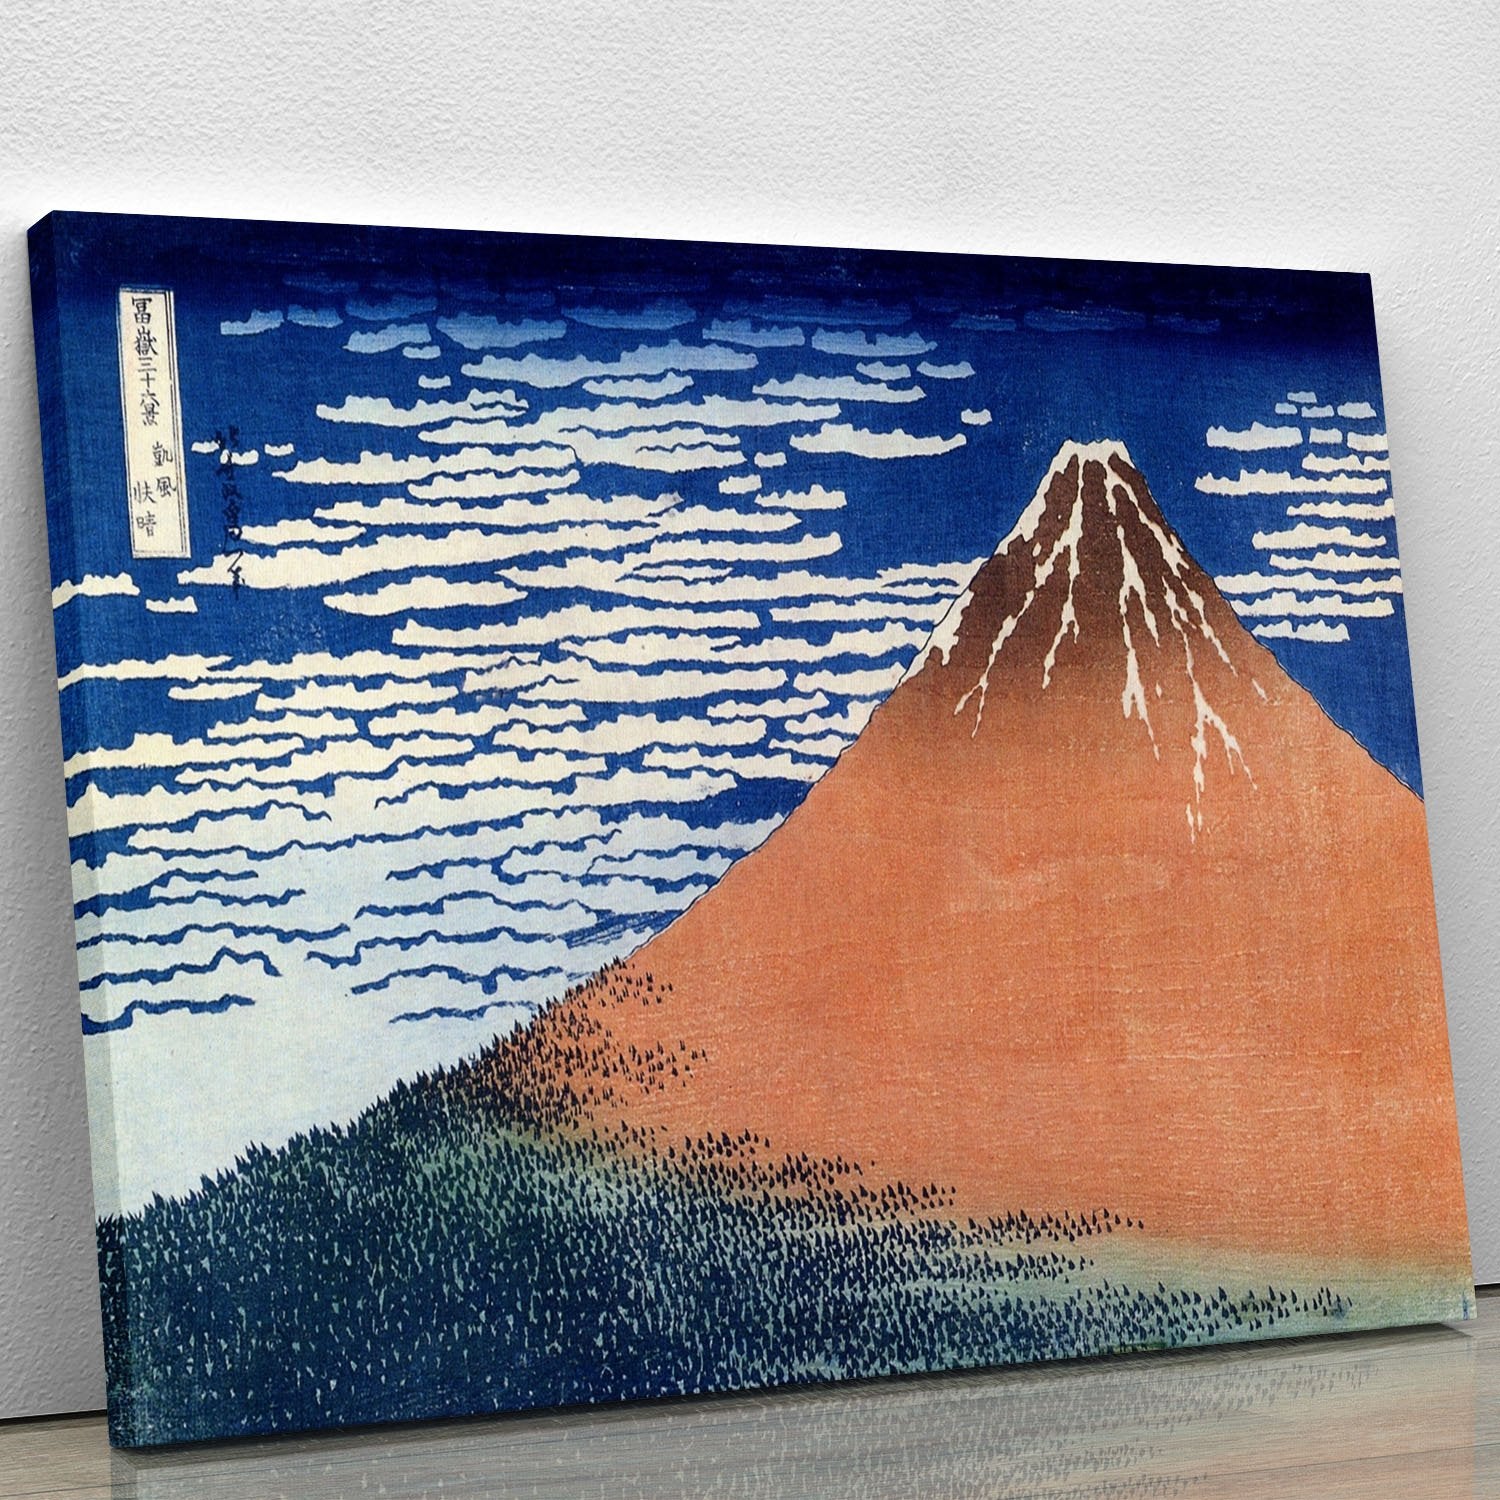 Mount Fuji by Hokusai Canvas Print or Poster